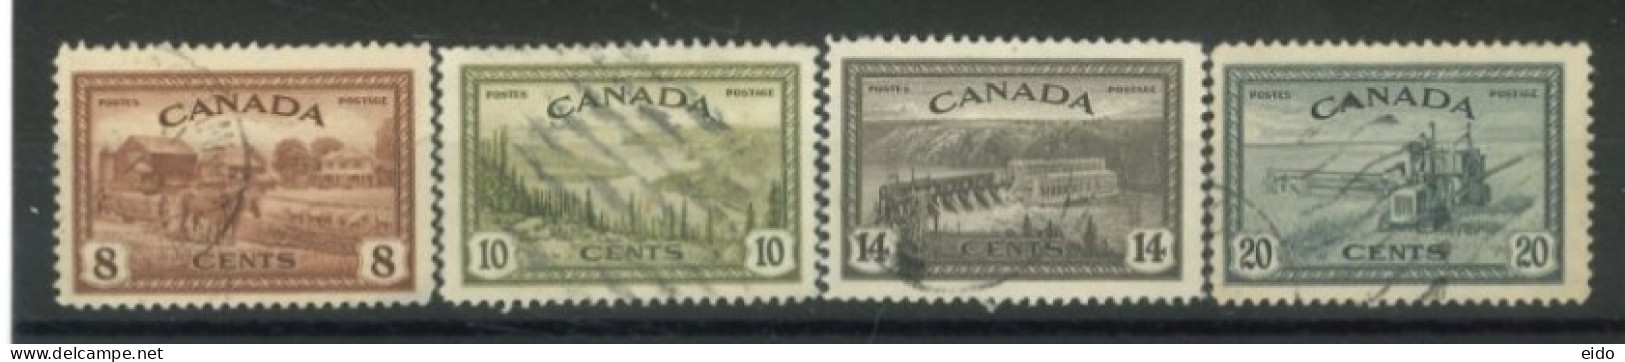 CANADA - 1946, RE CONVERTION TO PEACE STAMPS SET OF 4, USED. - Used Stamps